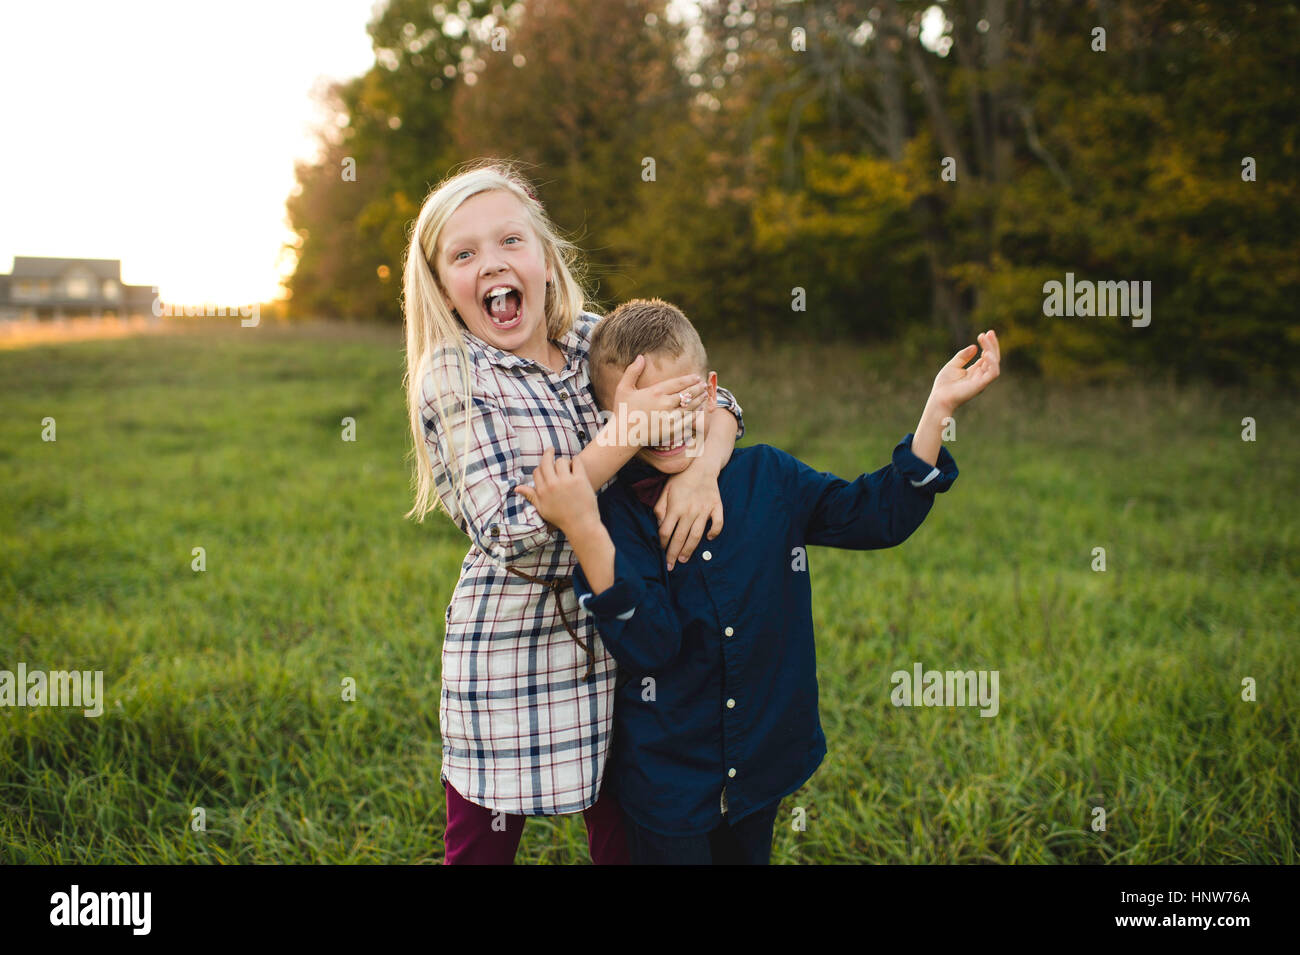 Sister covering brother's eyes smiling Stock Photo